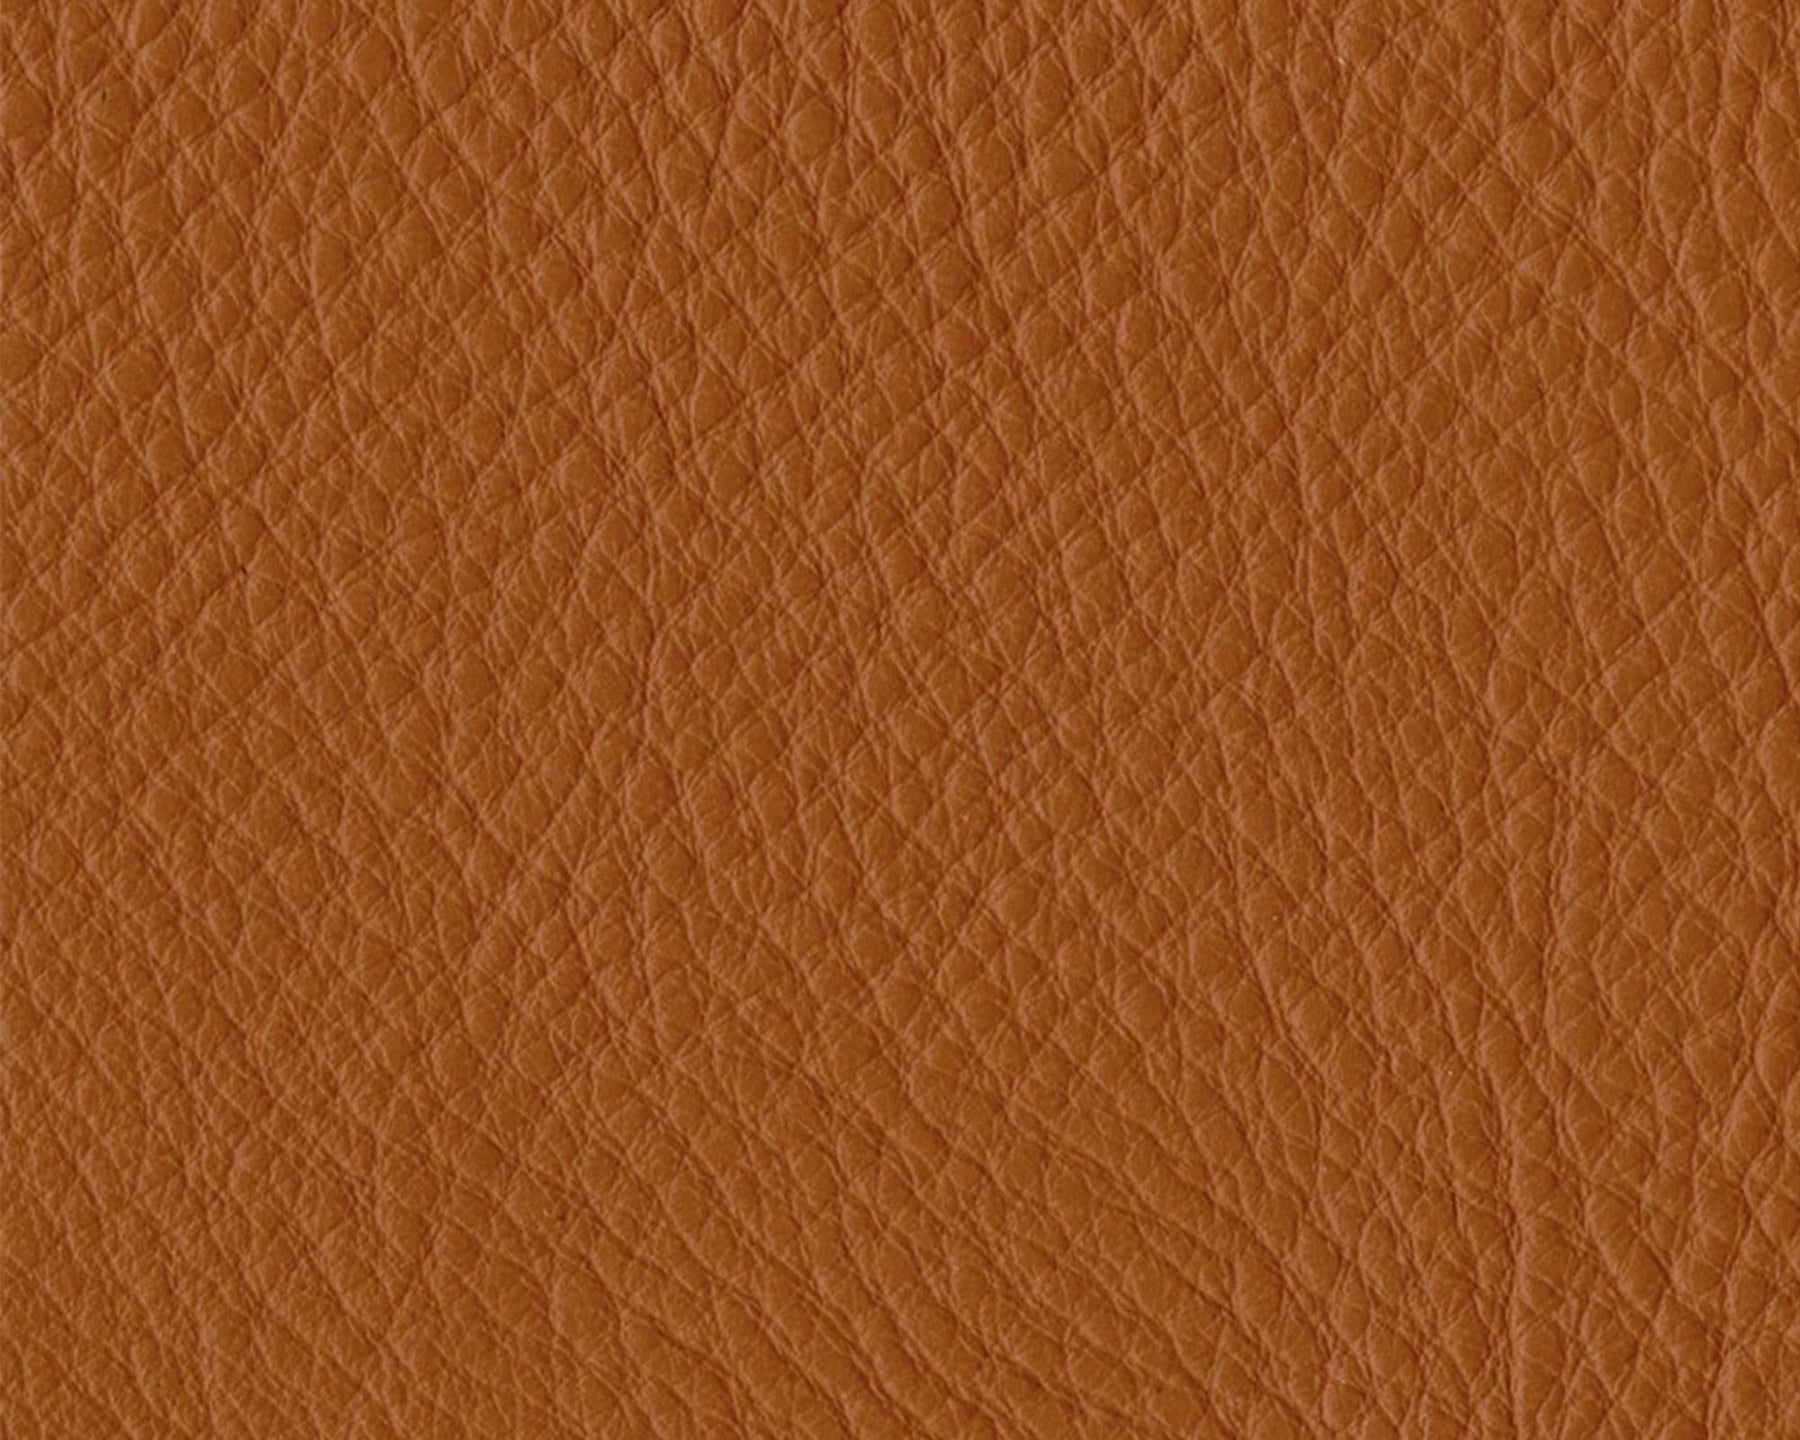 Thor Leather - 307